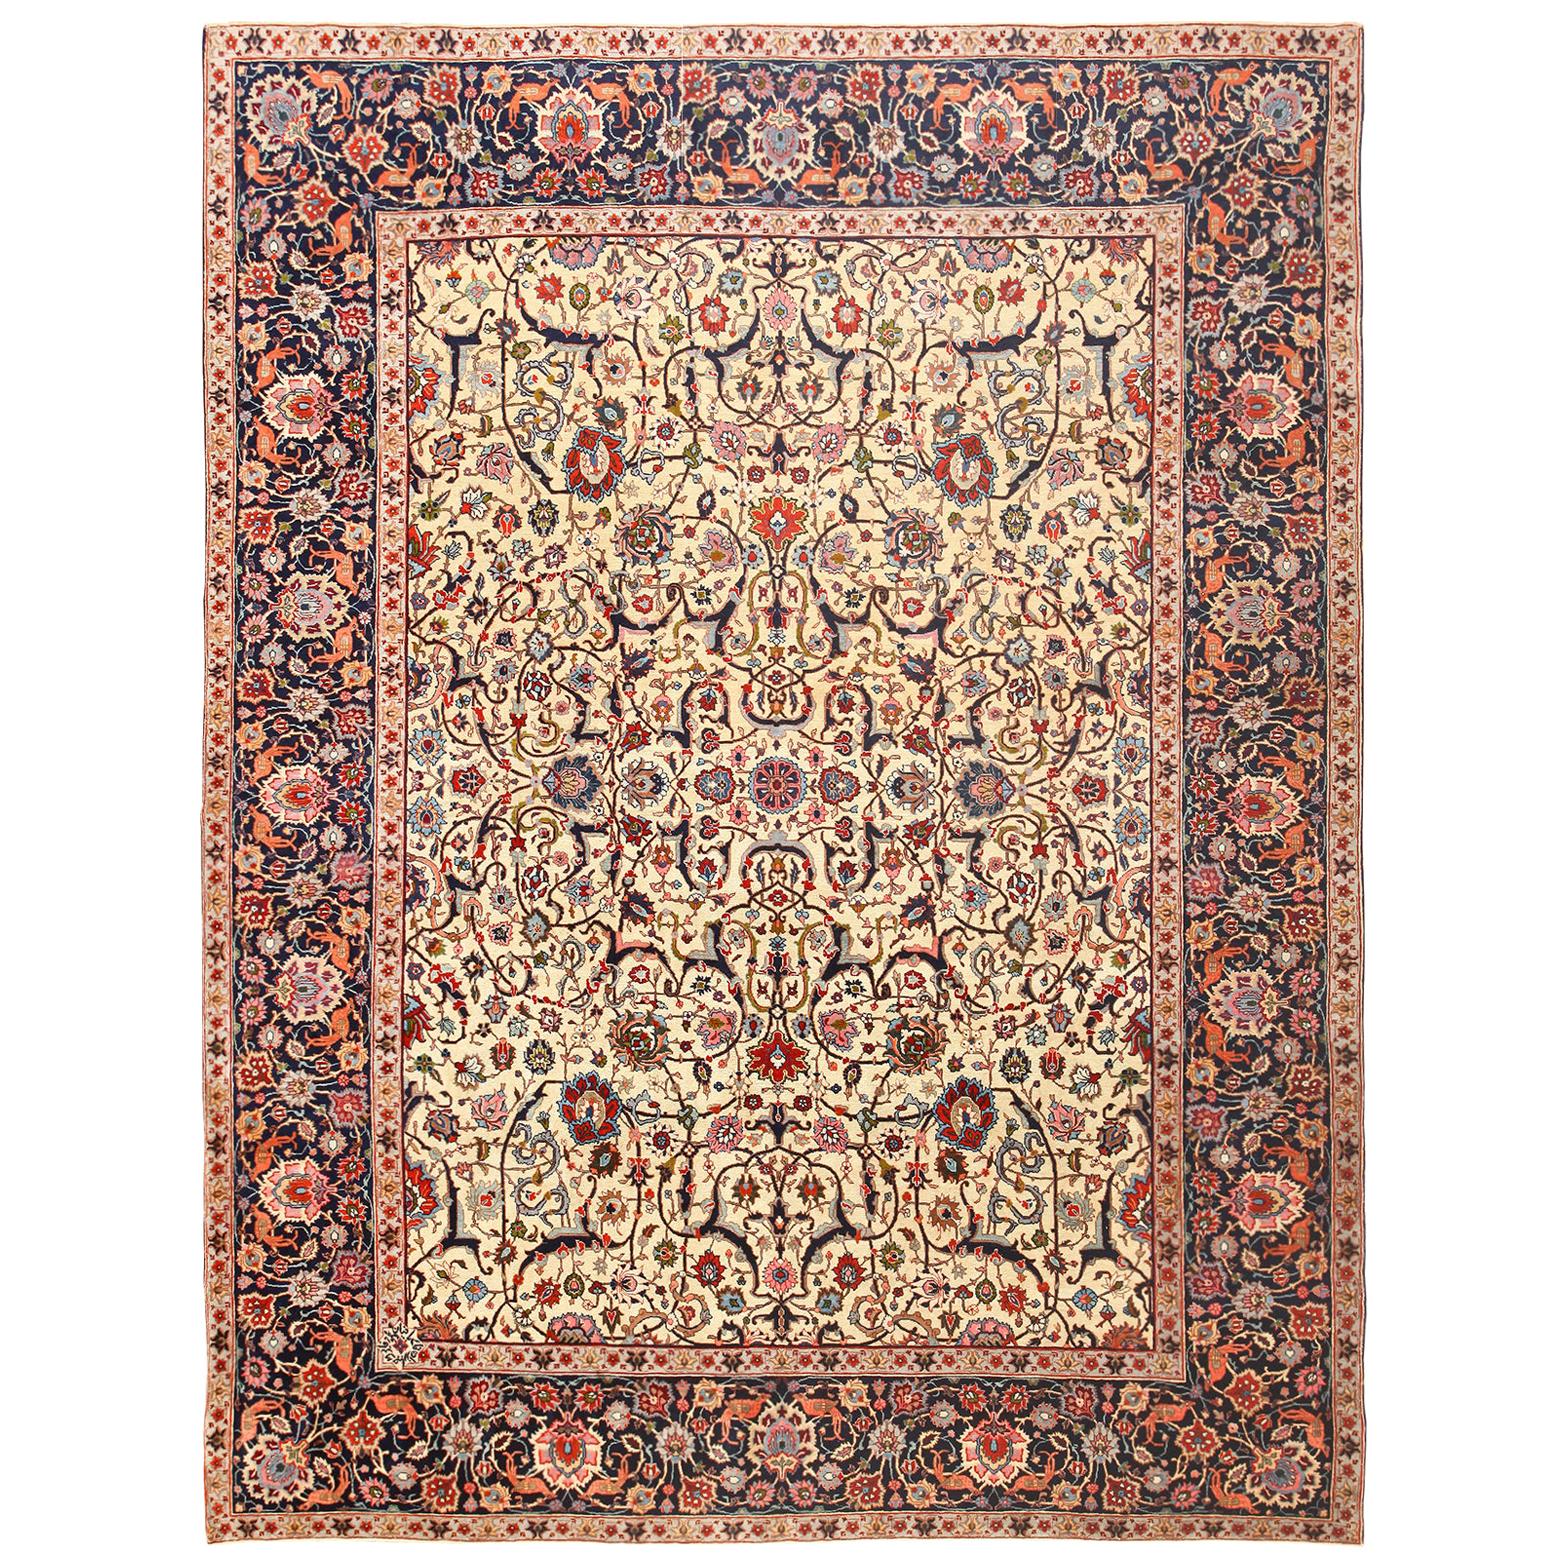 Antique Persian Tabriz Rug. Size: 9 ft 4 in x 12 ft 6 in